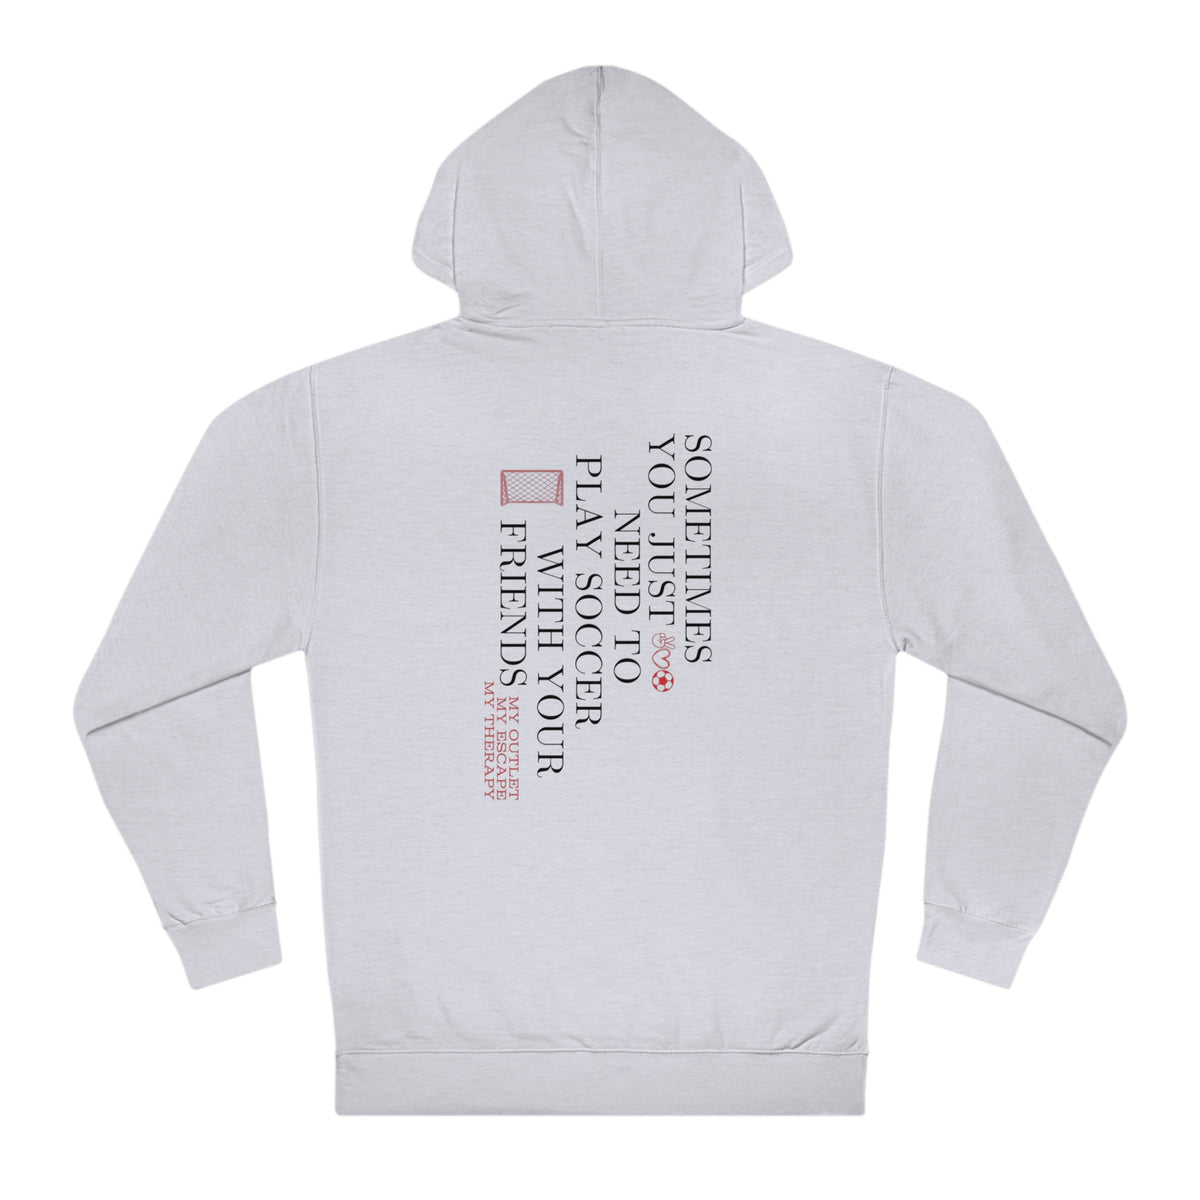 Soccer With Friends Adult Hooded Sweatshirt